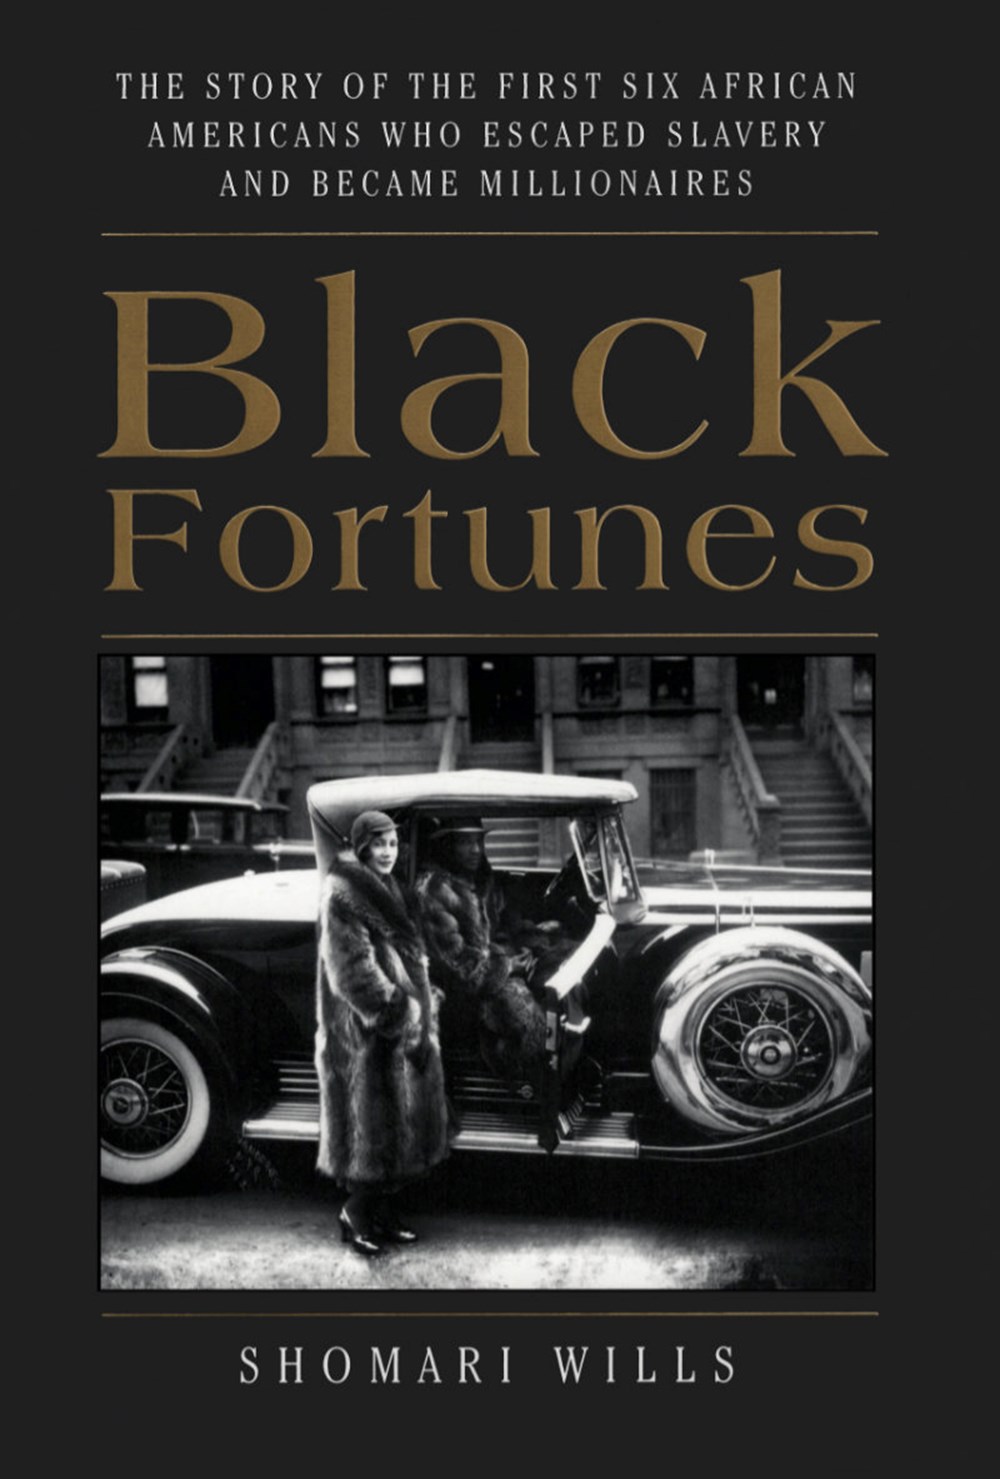 Black Fortunes The Story of the First Six African Americans Who Survived Slavery and Became Milliona